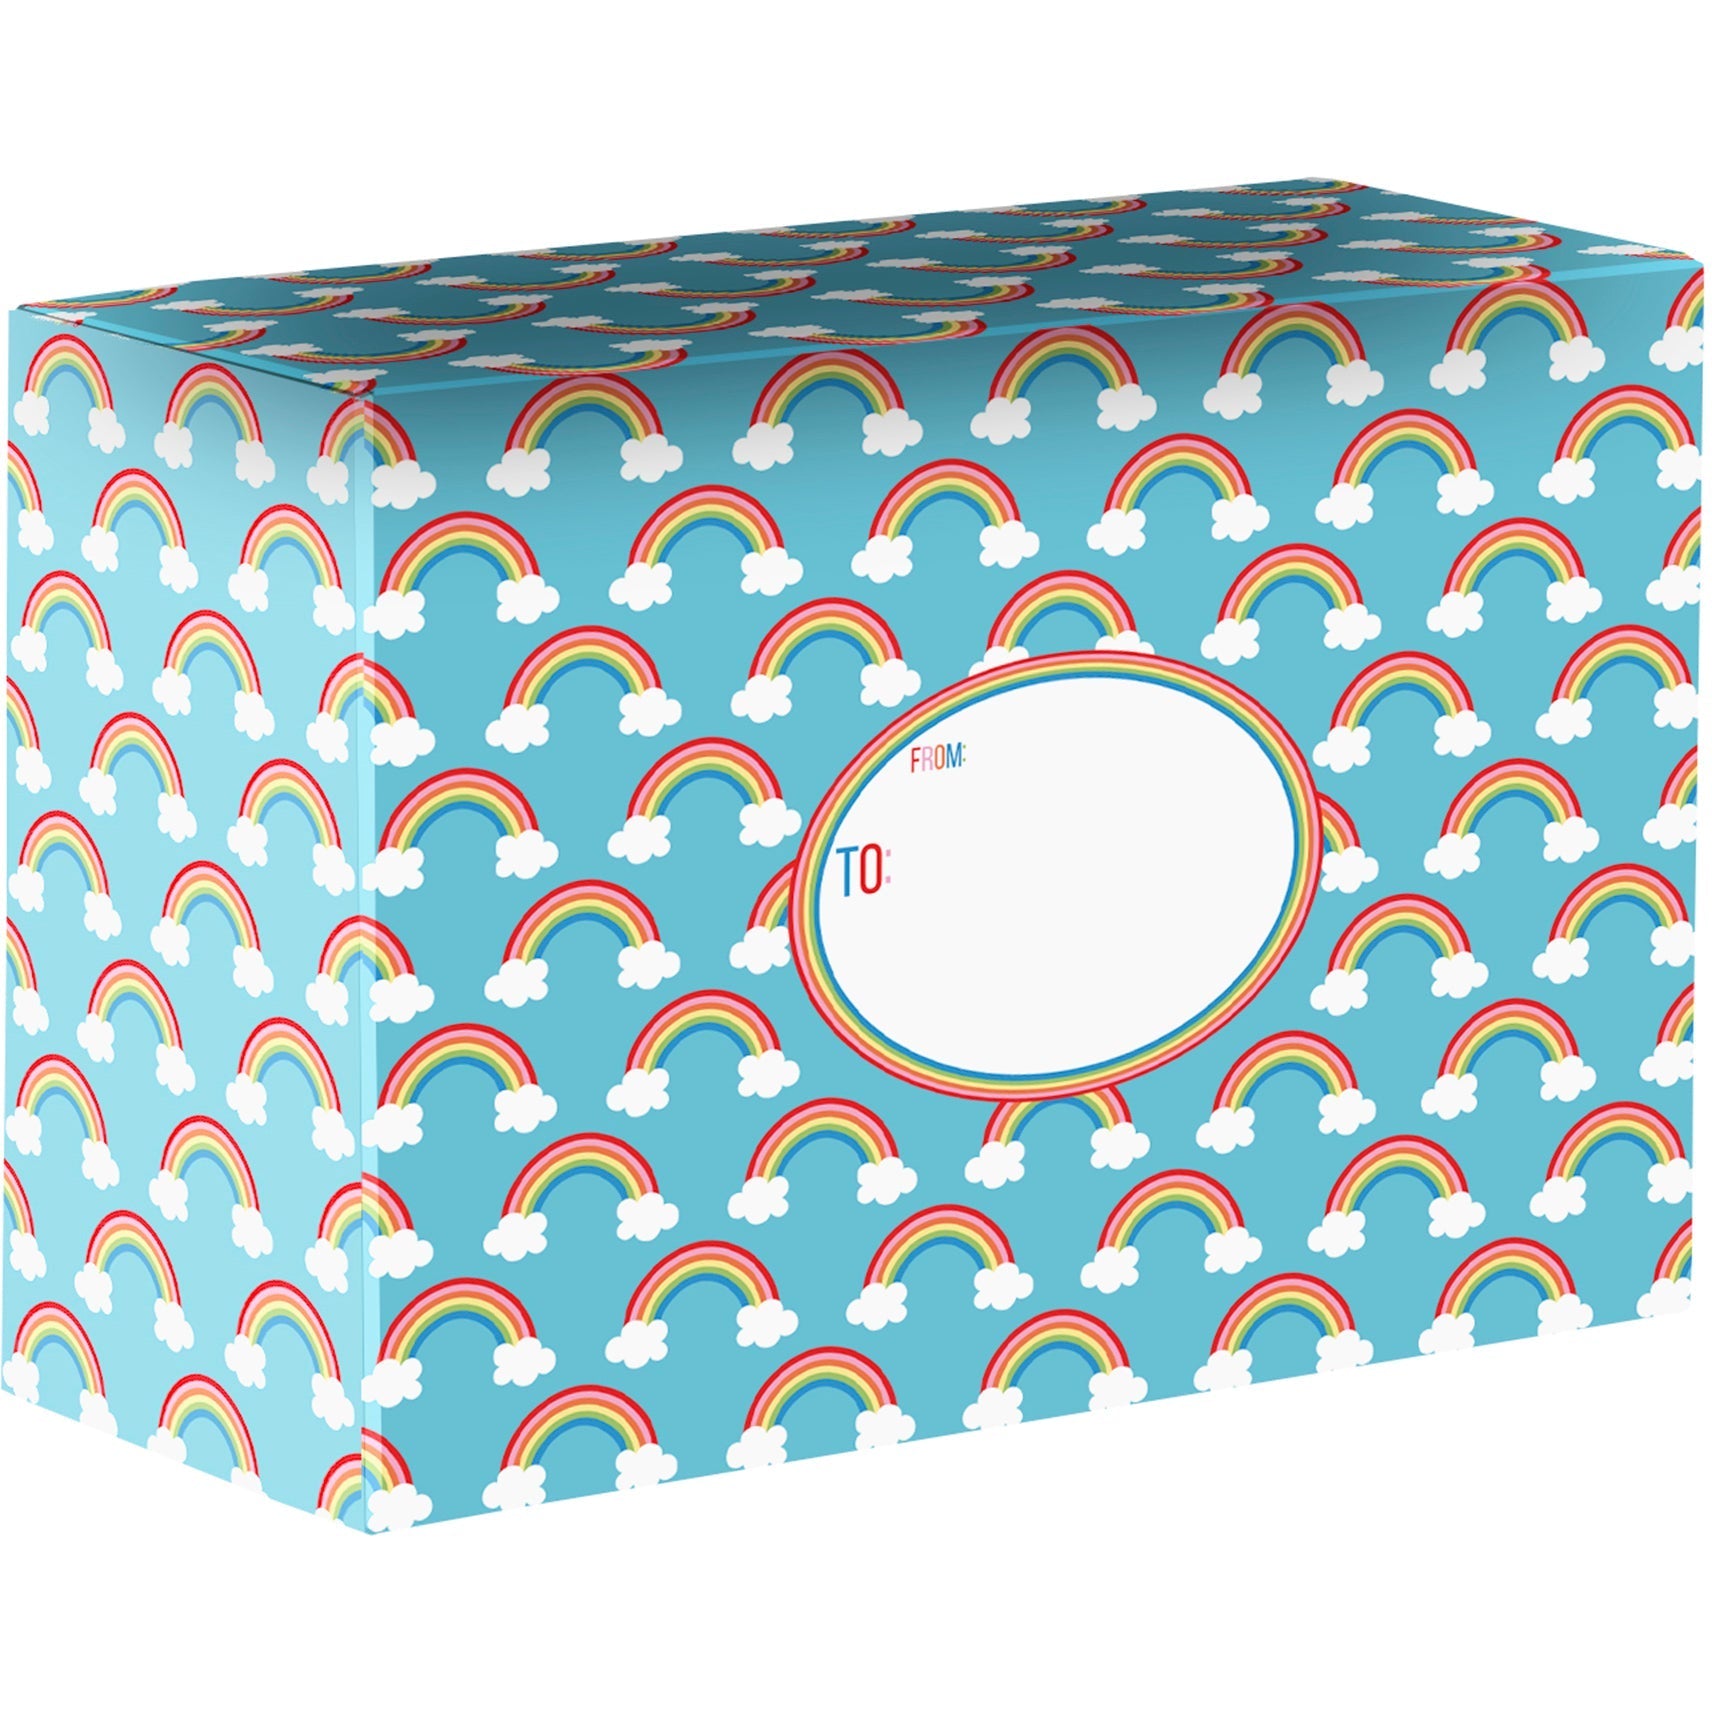 Over the Rainbow Medium Kids Printed Gift Mailing Boxes